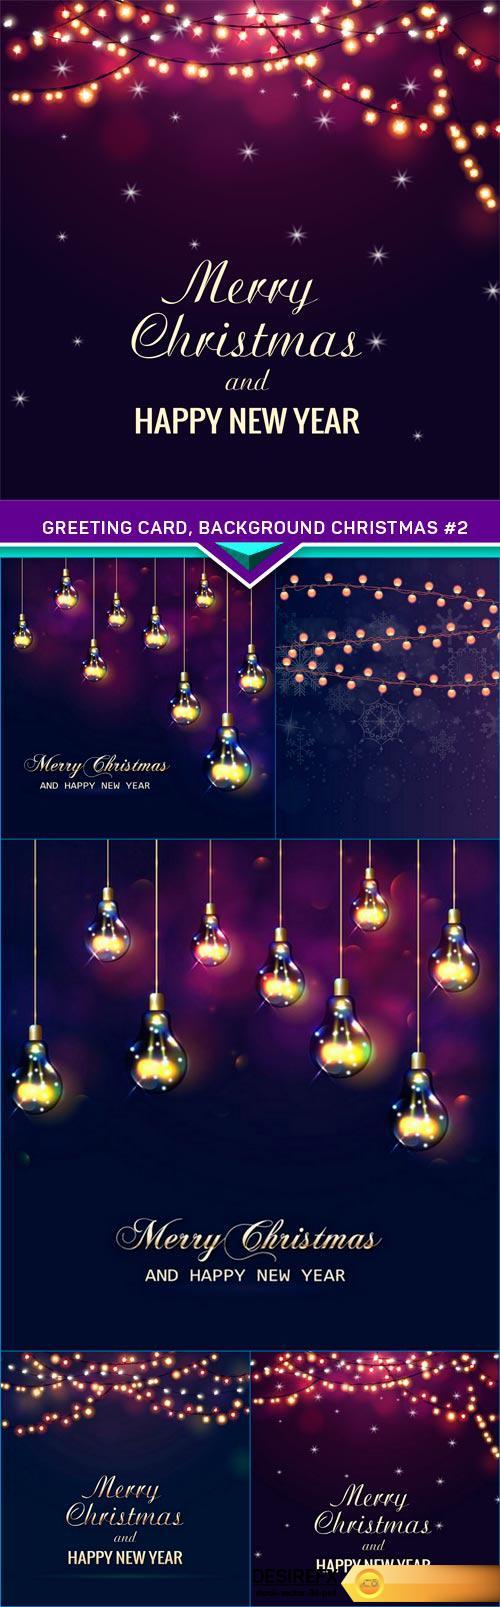 Greeting card, background Christmas #2 5X EPS